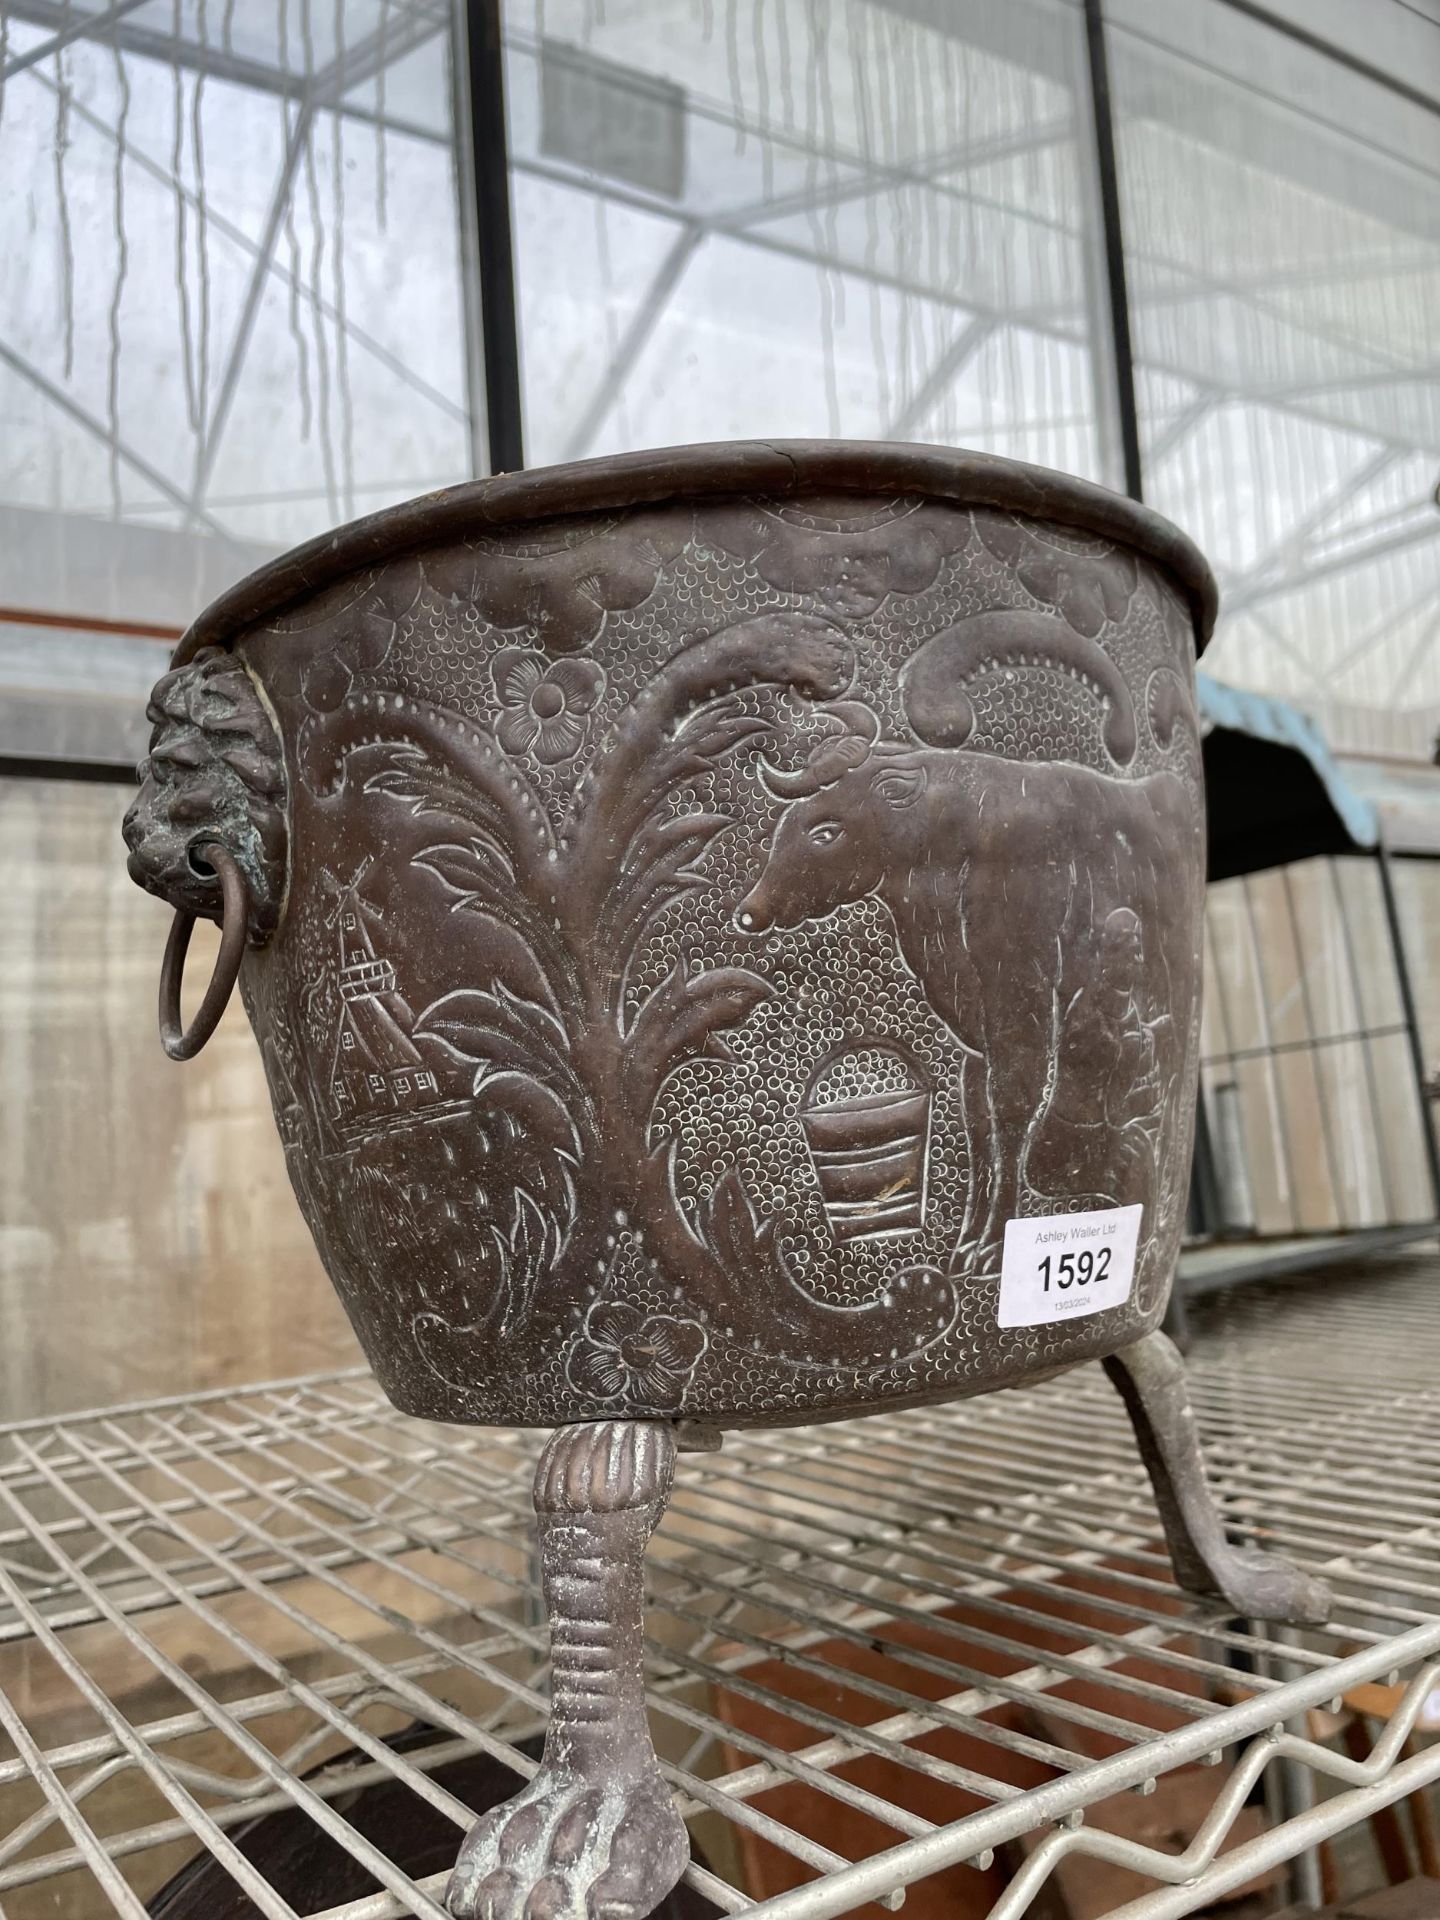 A VINTAGE ORNATE AND DECORATIVE COPPER PLANTER WITH TWIN LION HEAD HANDLES AND TRIPOD FEET - Image 2 of 2